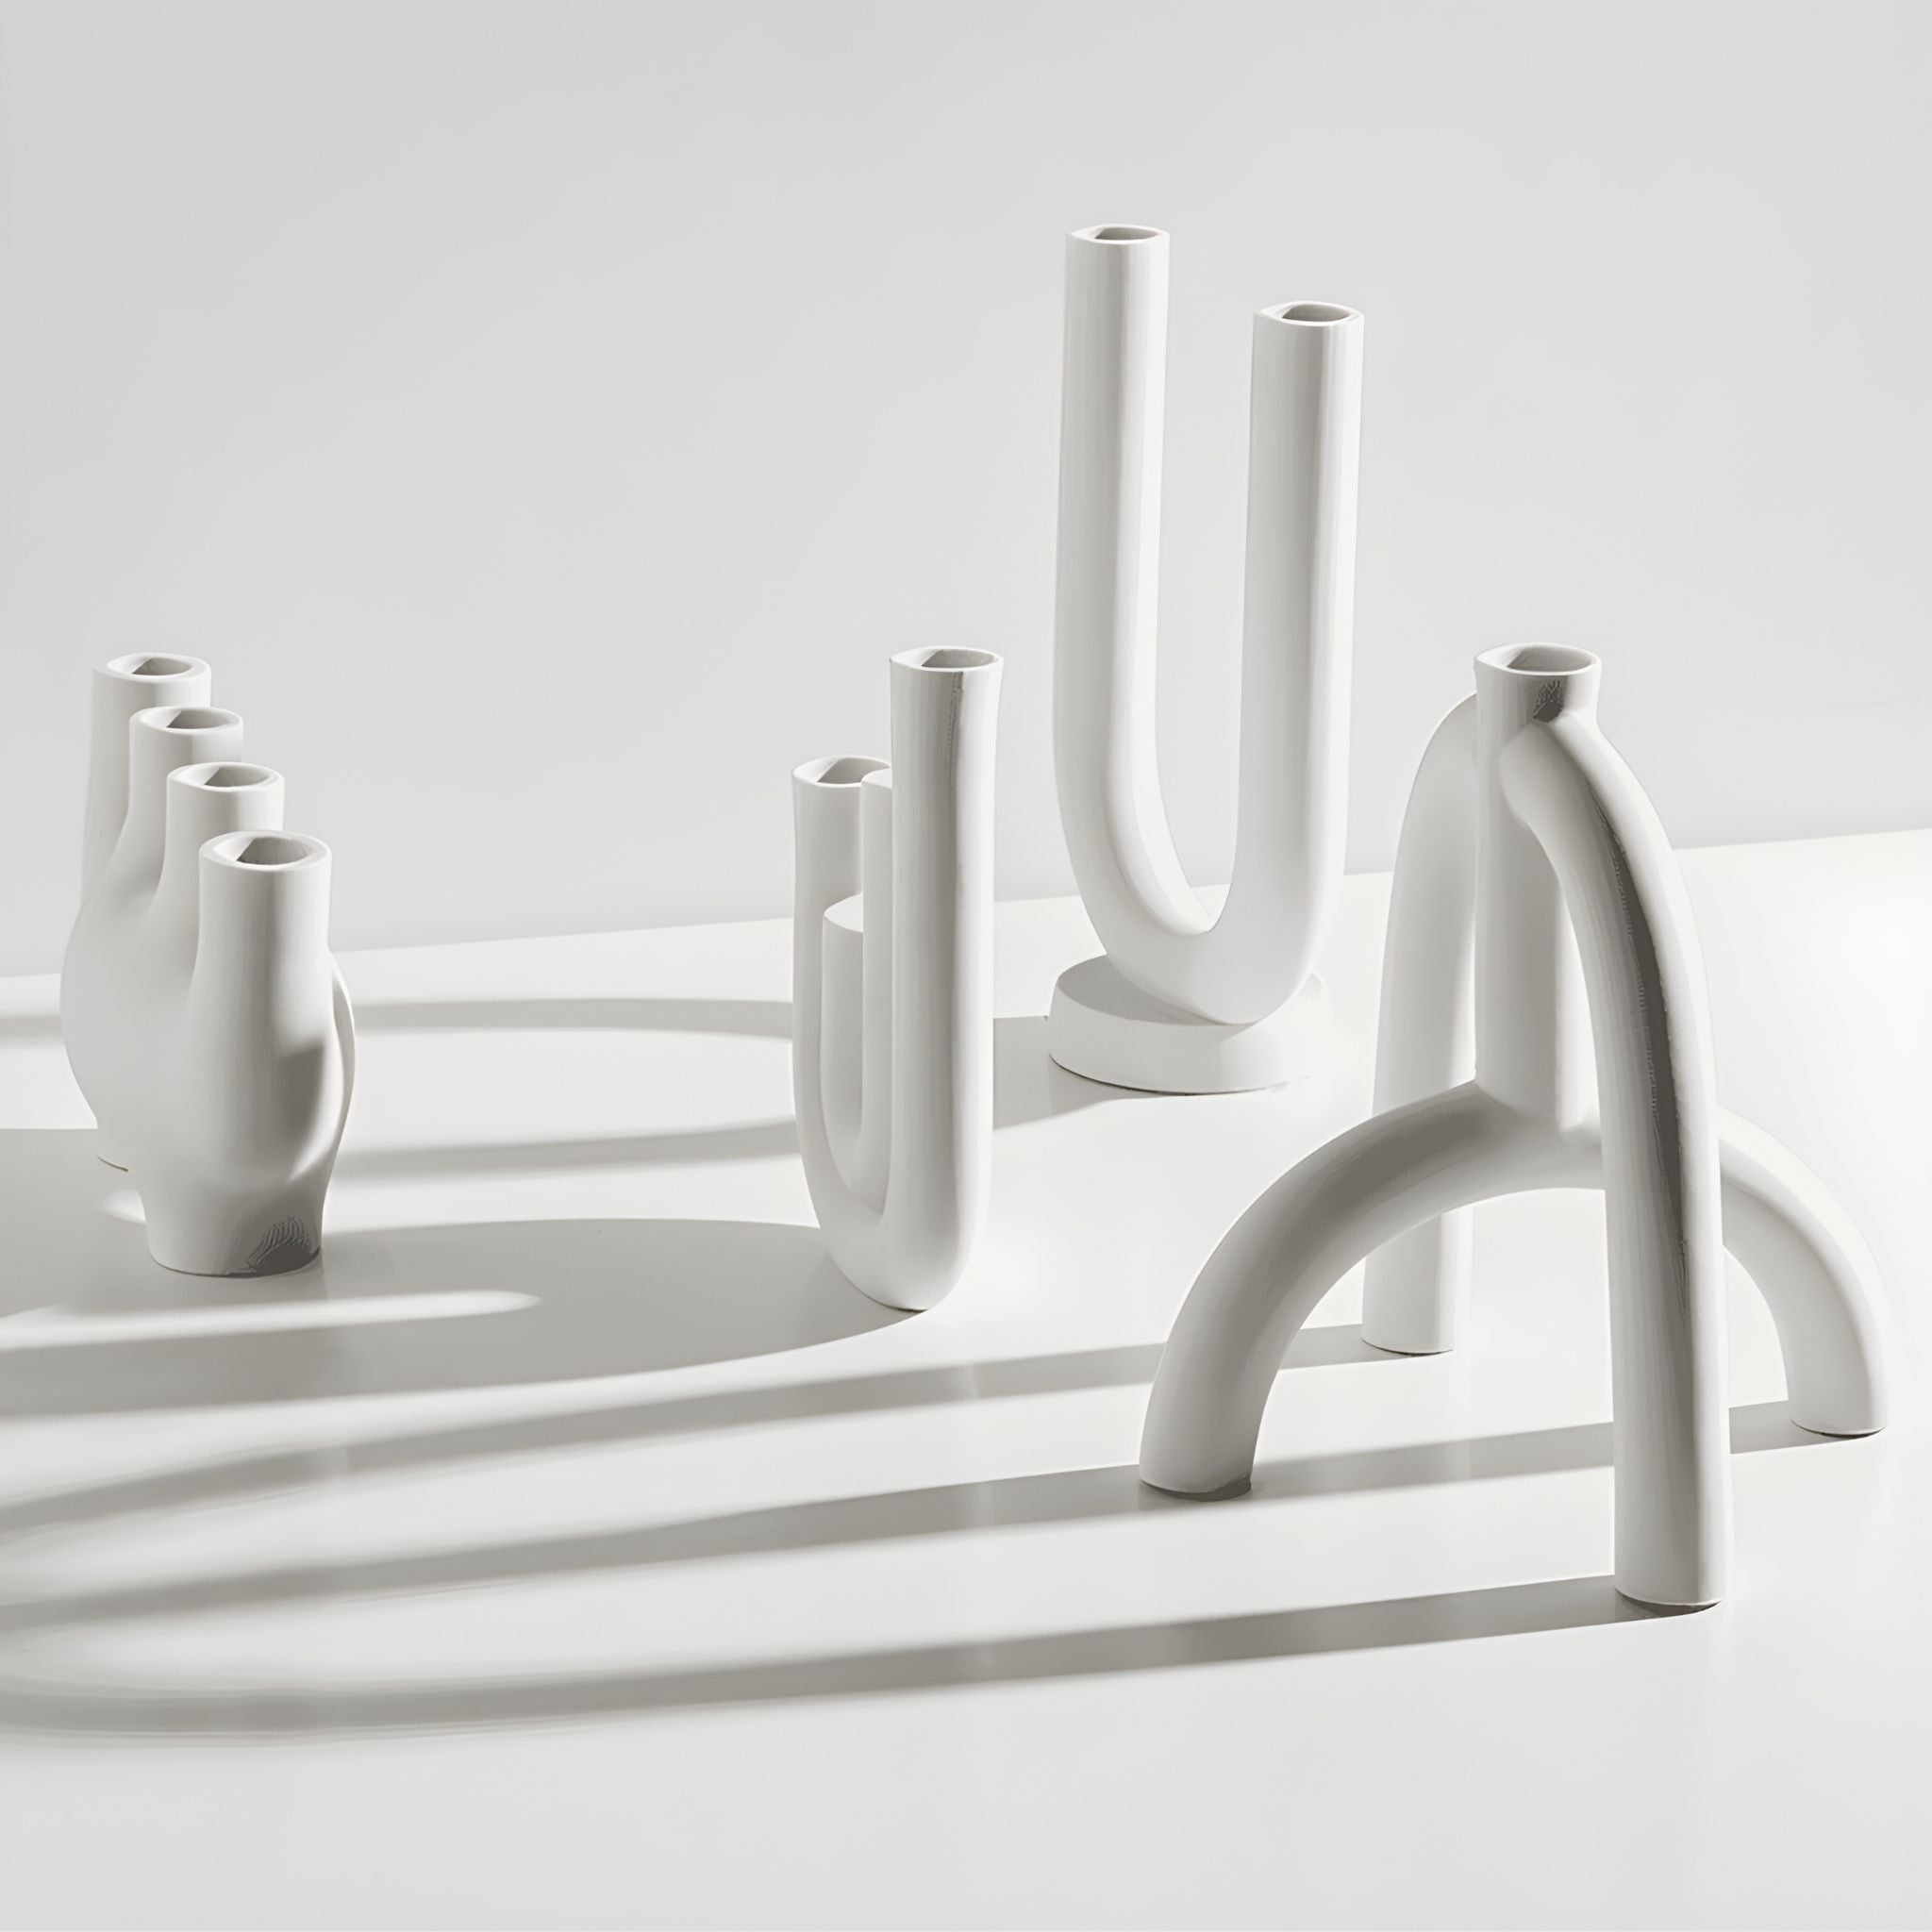 'Atelier' ceramic candle holder collection